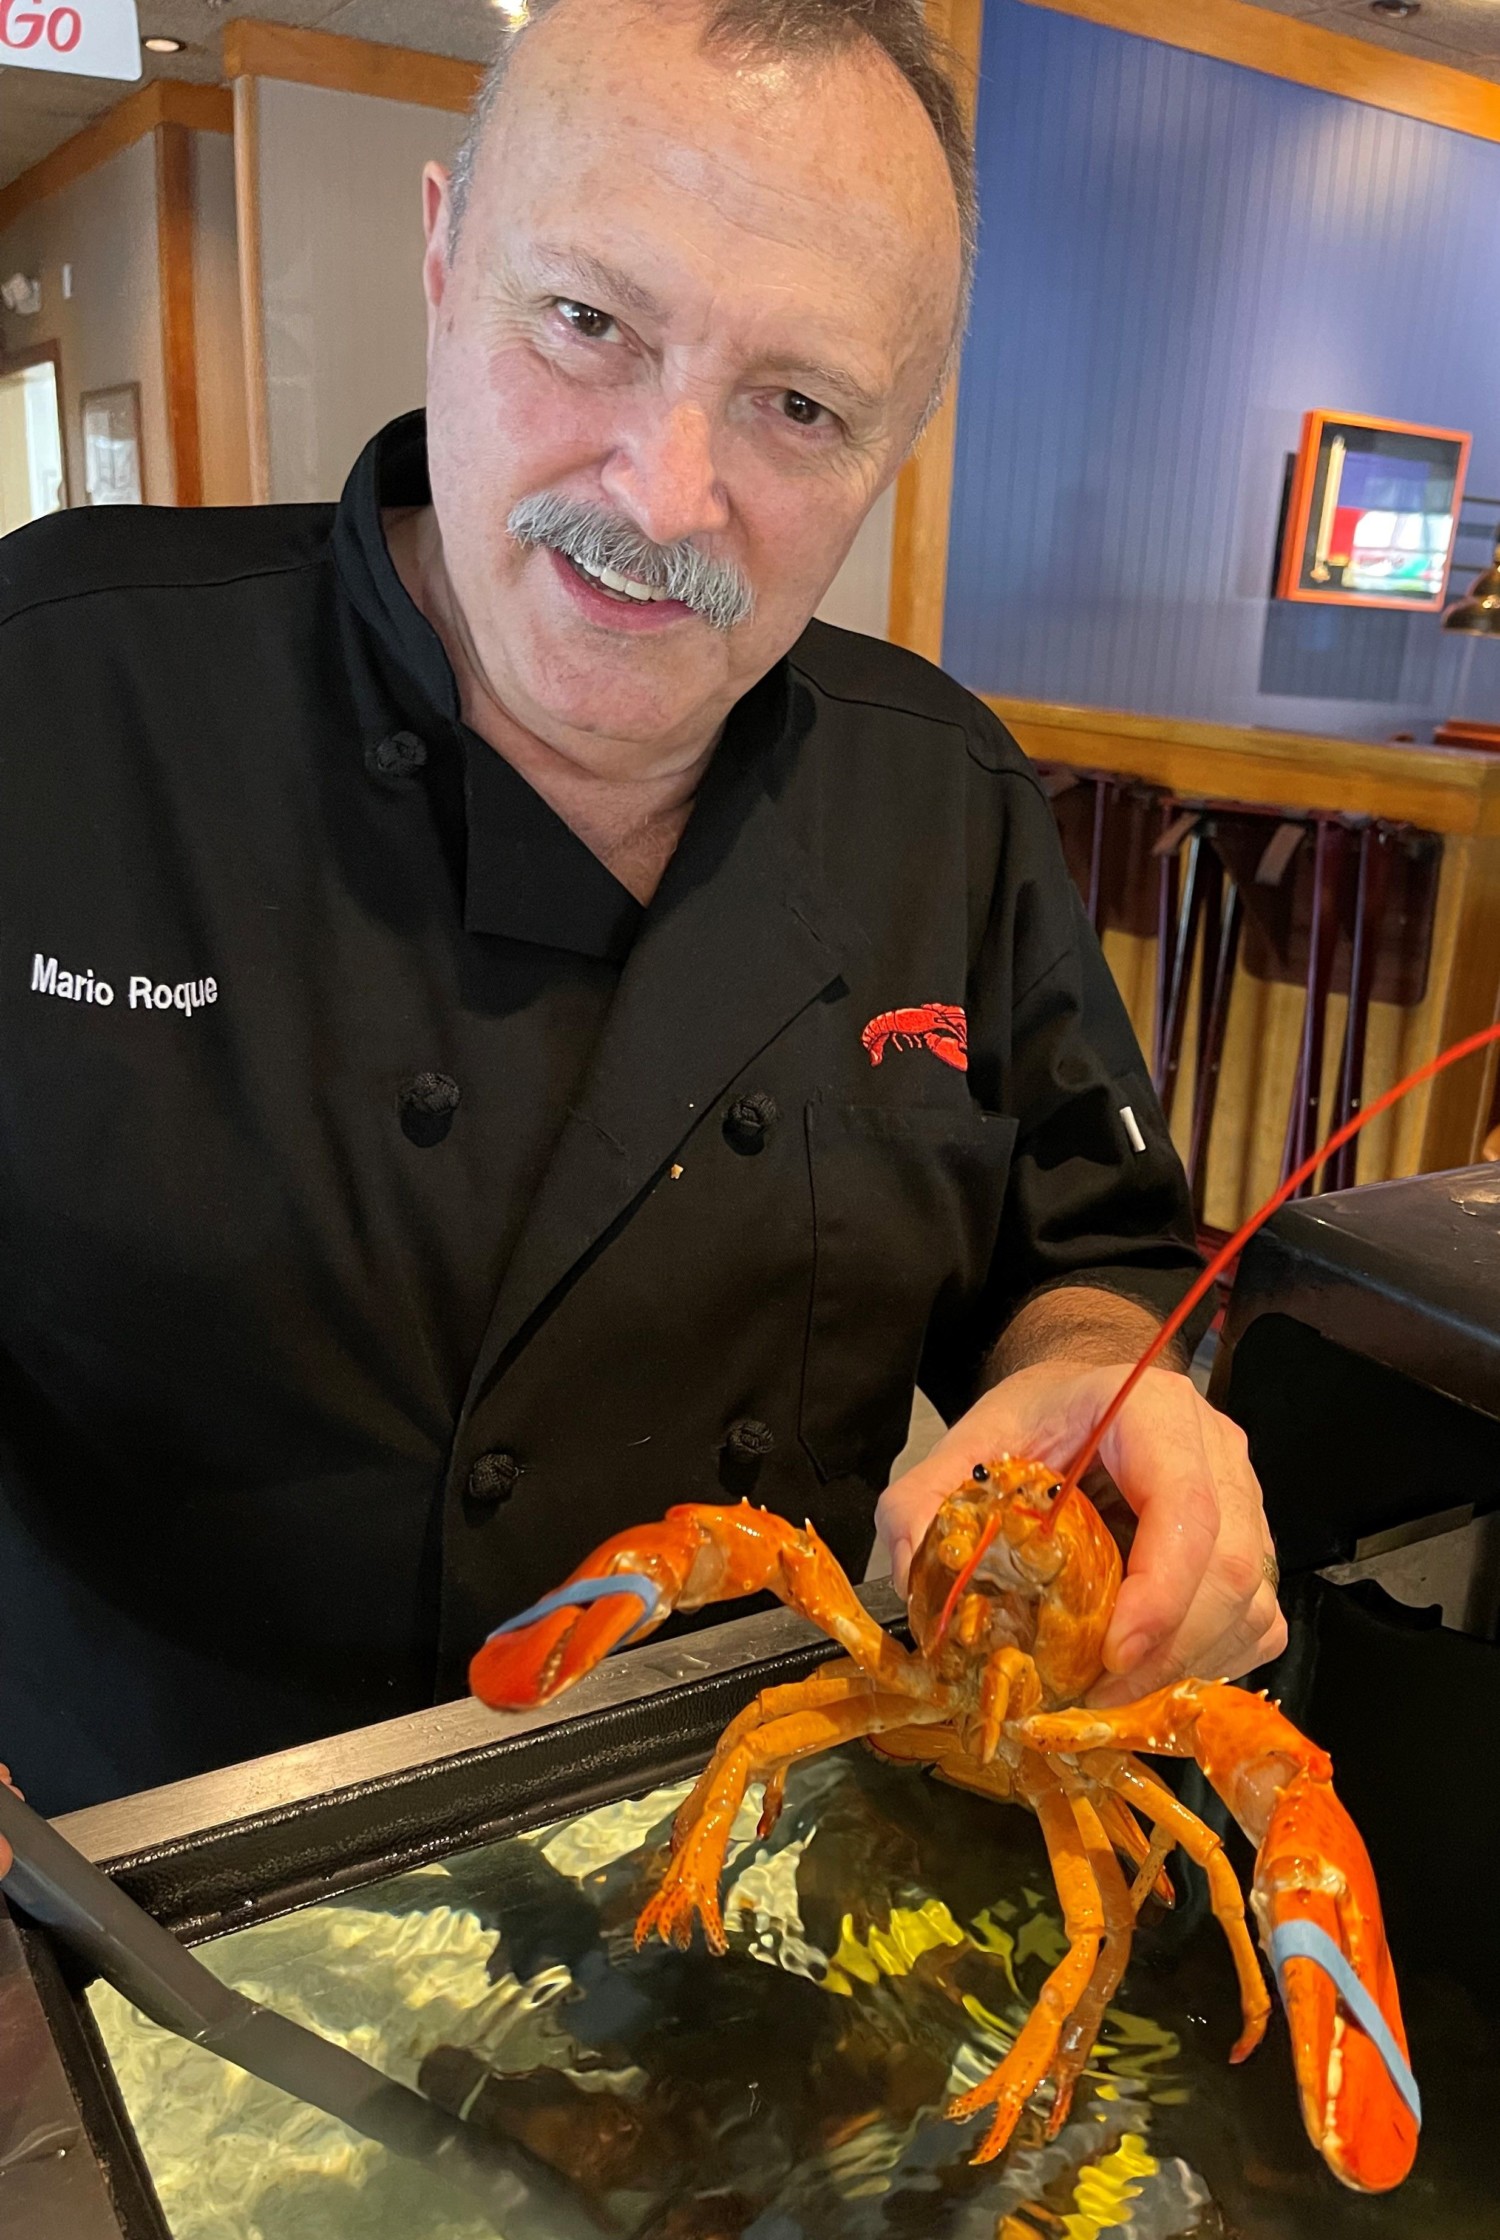 Florida Red Lobster employees rescue rare orange lobster